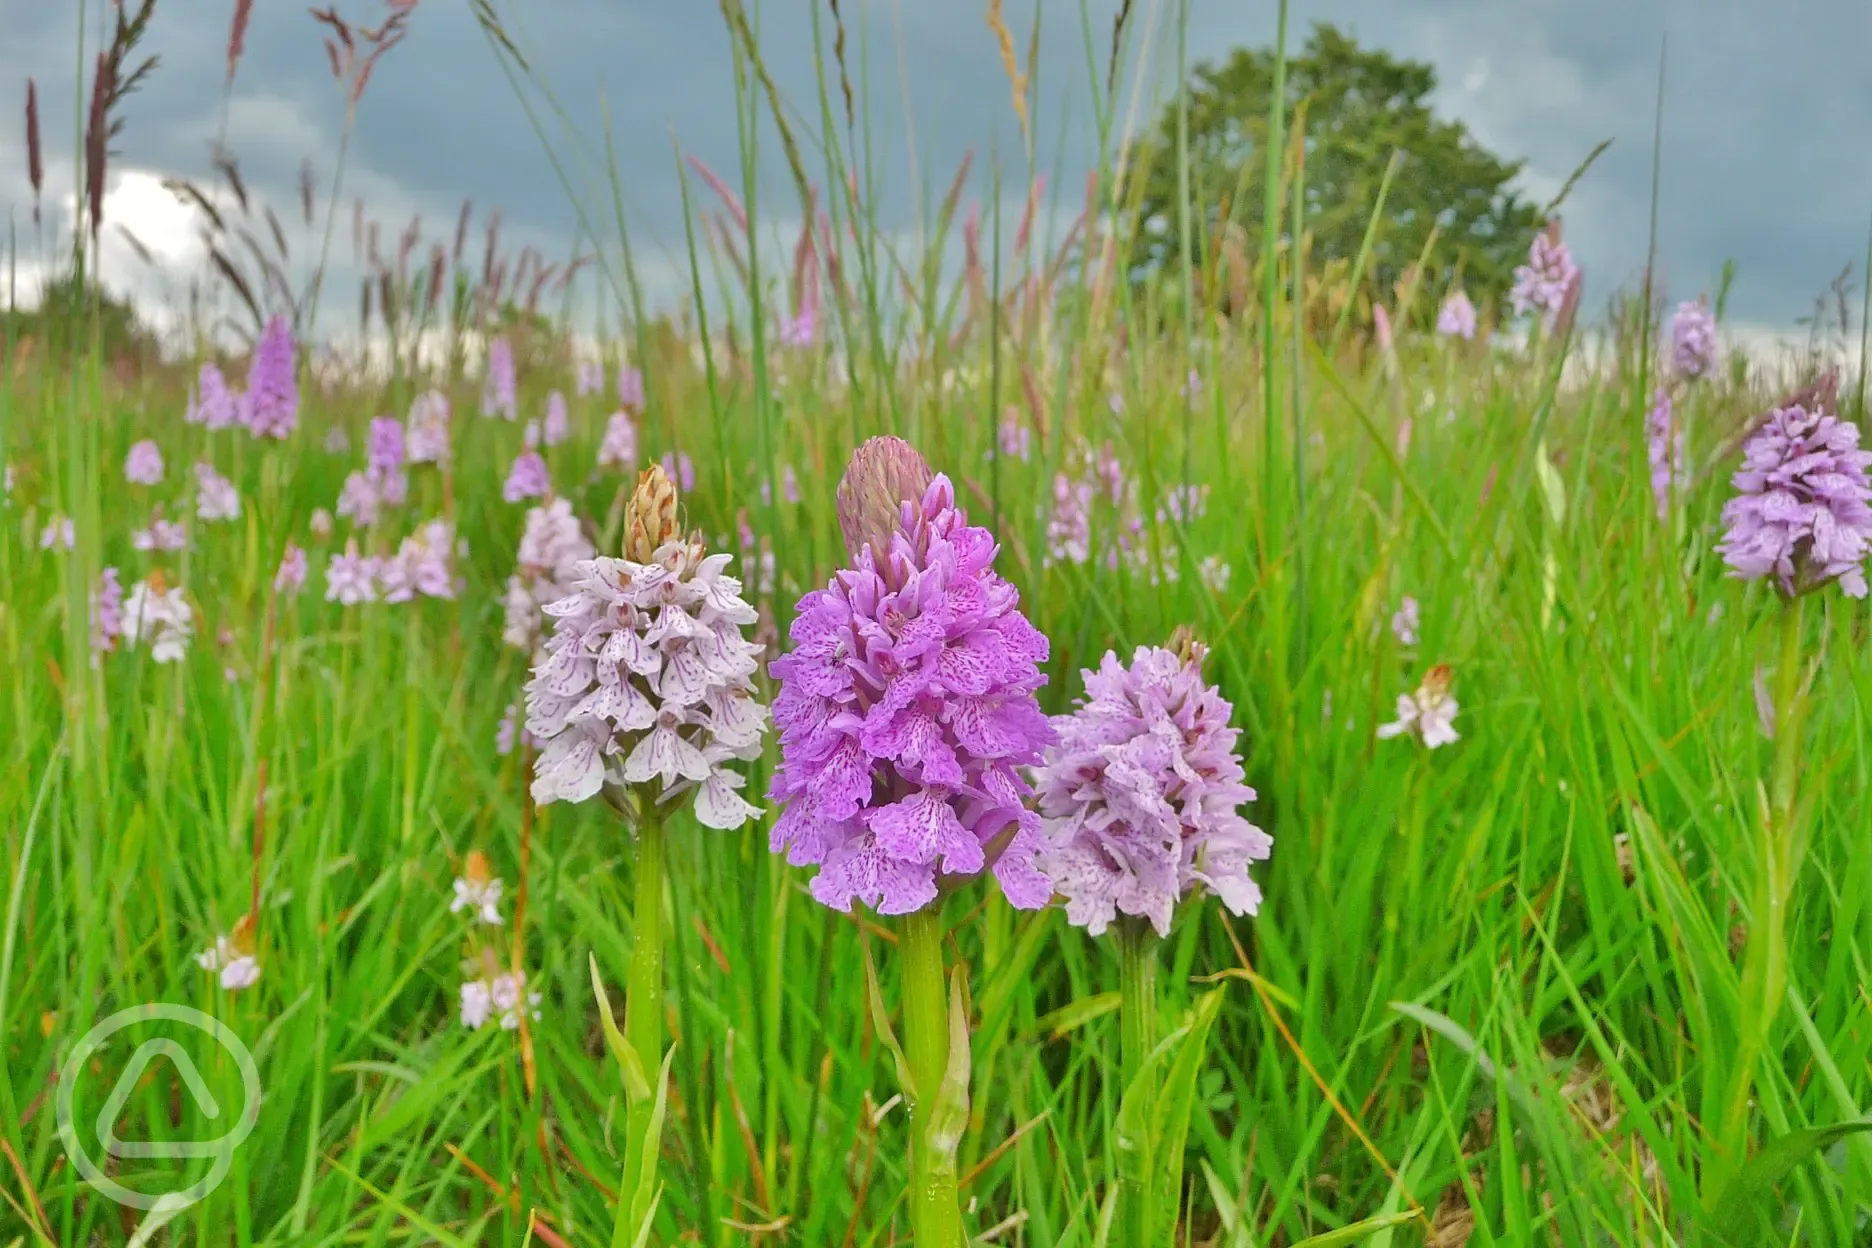 Our meadows are full of colour in early summer with plentiful wild orchids